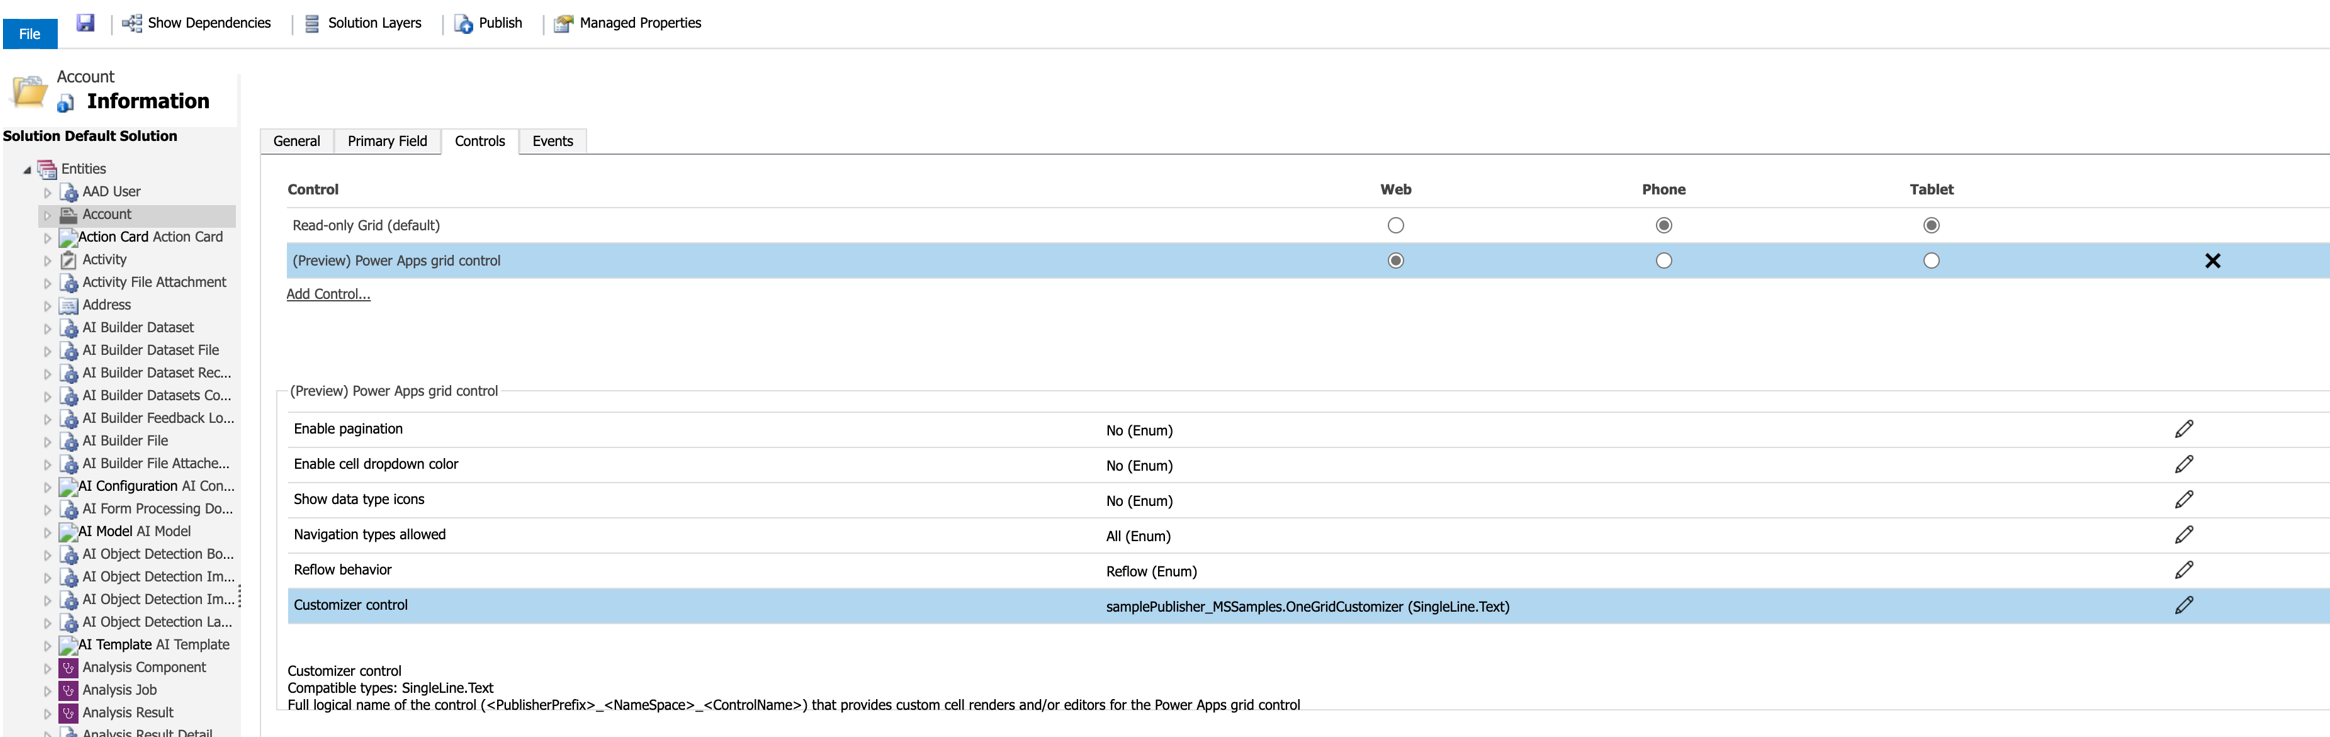 Assign a value to the customizer control property of the Power Apps grid control